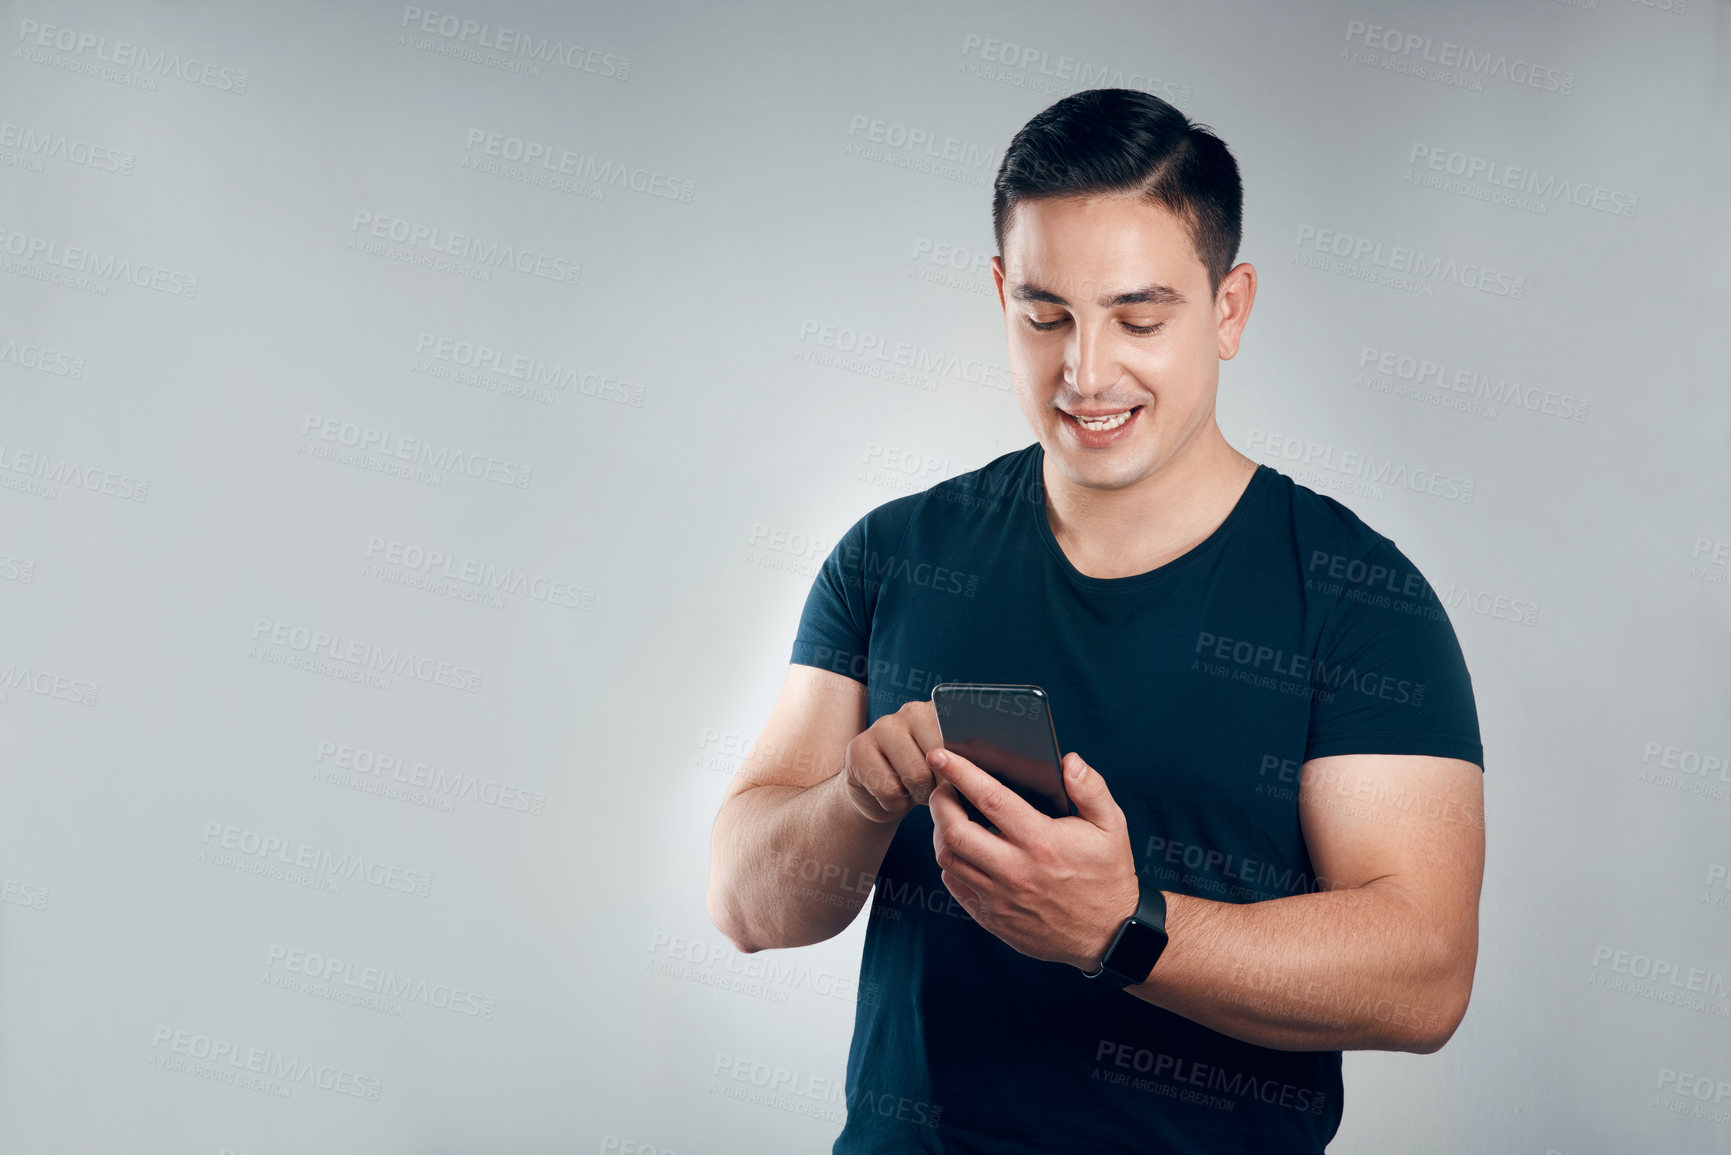 Buy stock photo Studio shot of a handsome young man using a cellphone against a grey background